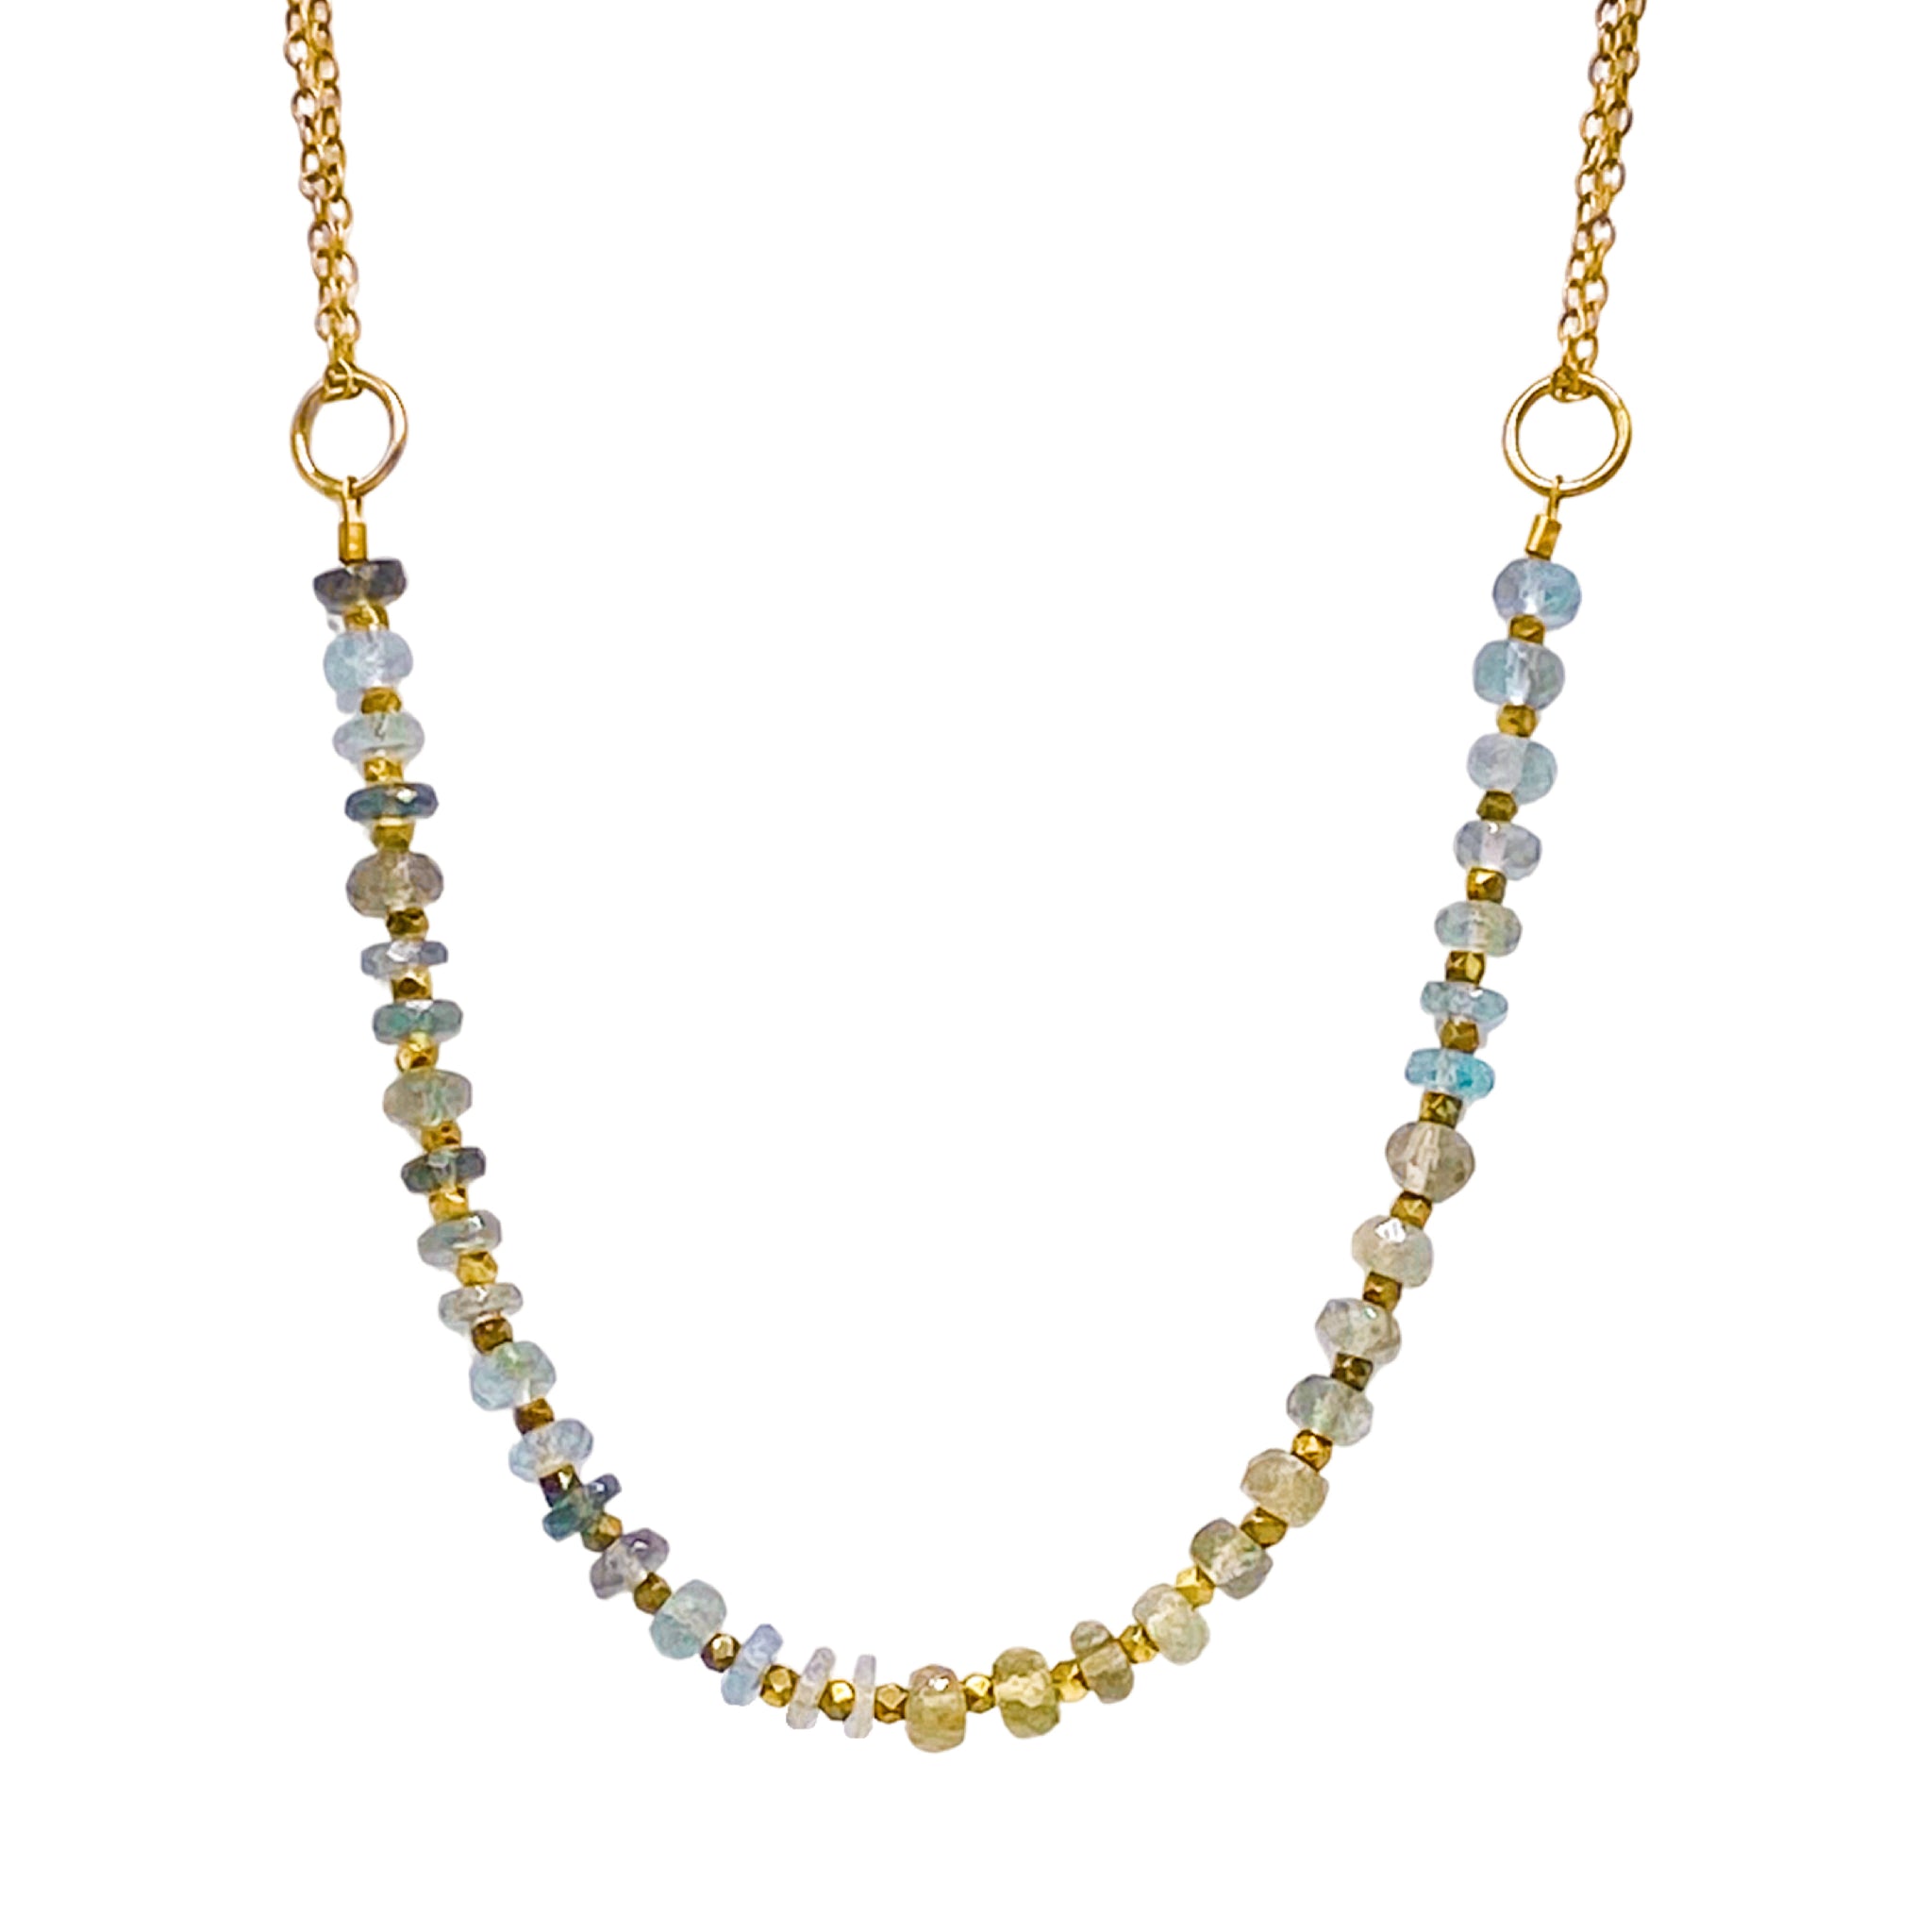 Robindira Unsworth Mossy Aquamarine Necklace Available at Shaylula Jewlery & Gifts in Tarrytown, NY and online